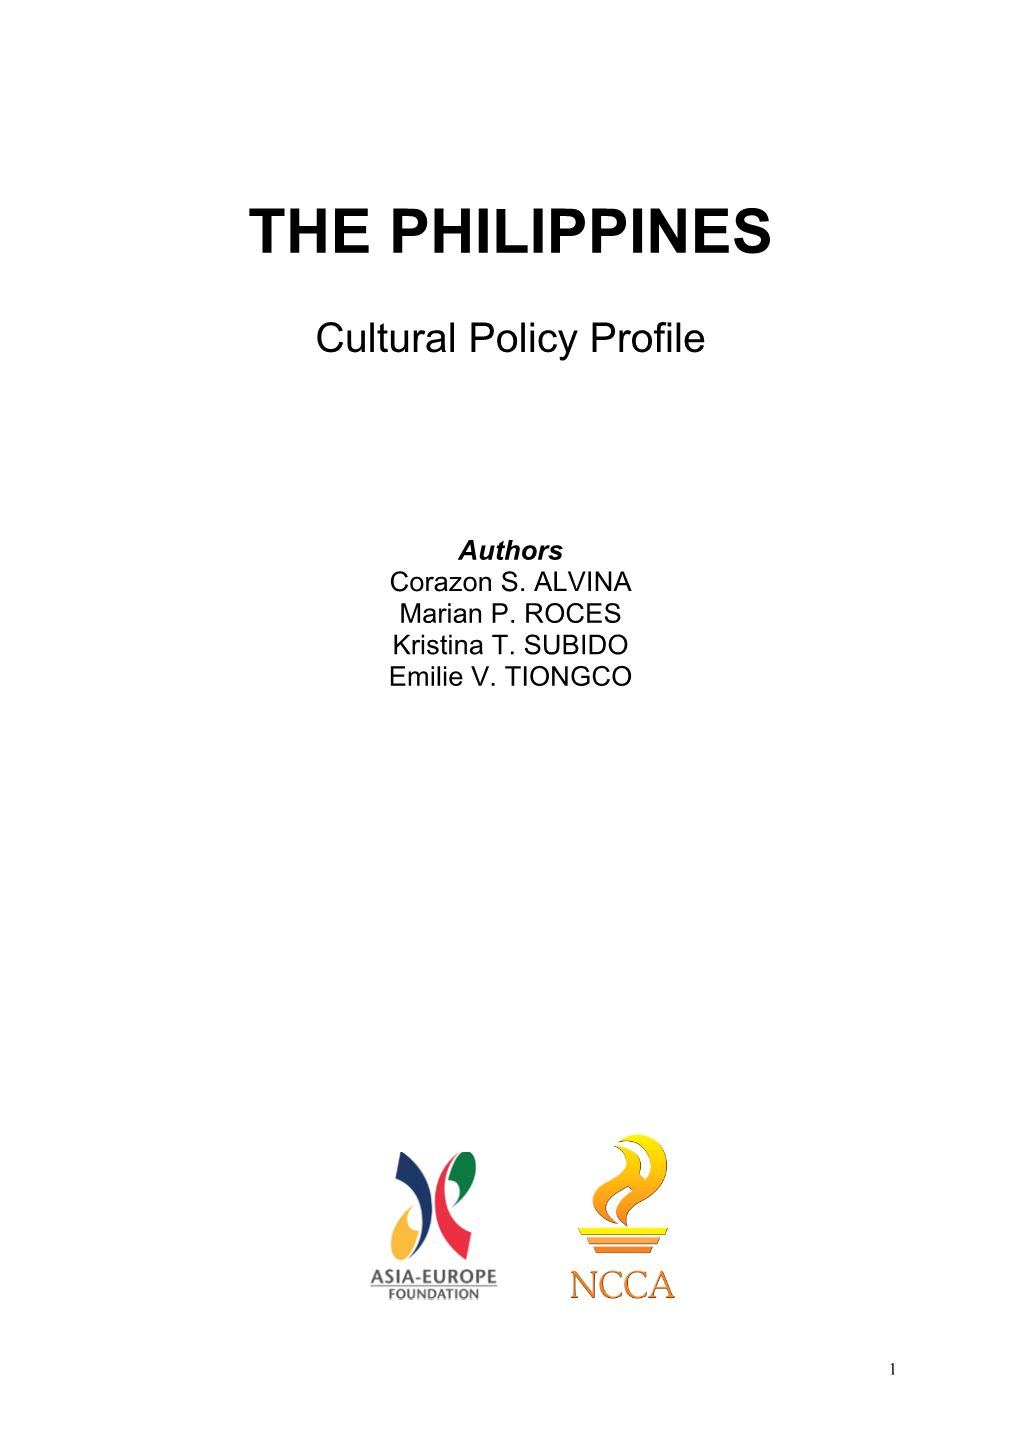 The Philippines Cultural Policy Profile